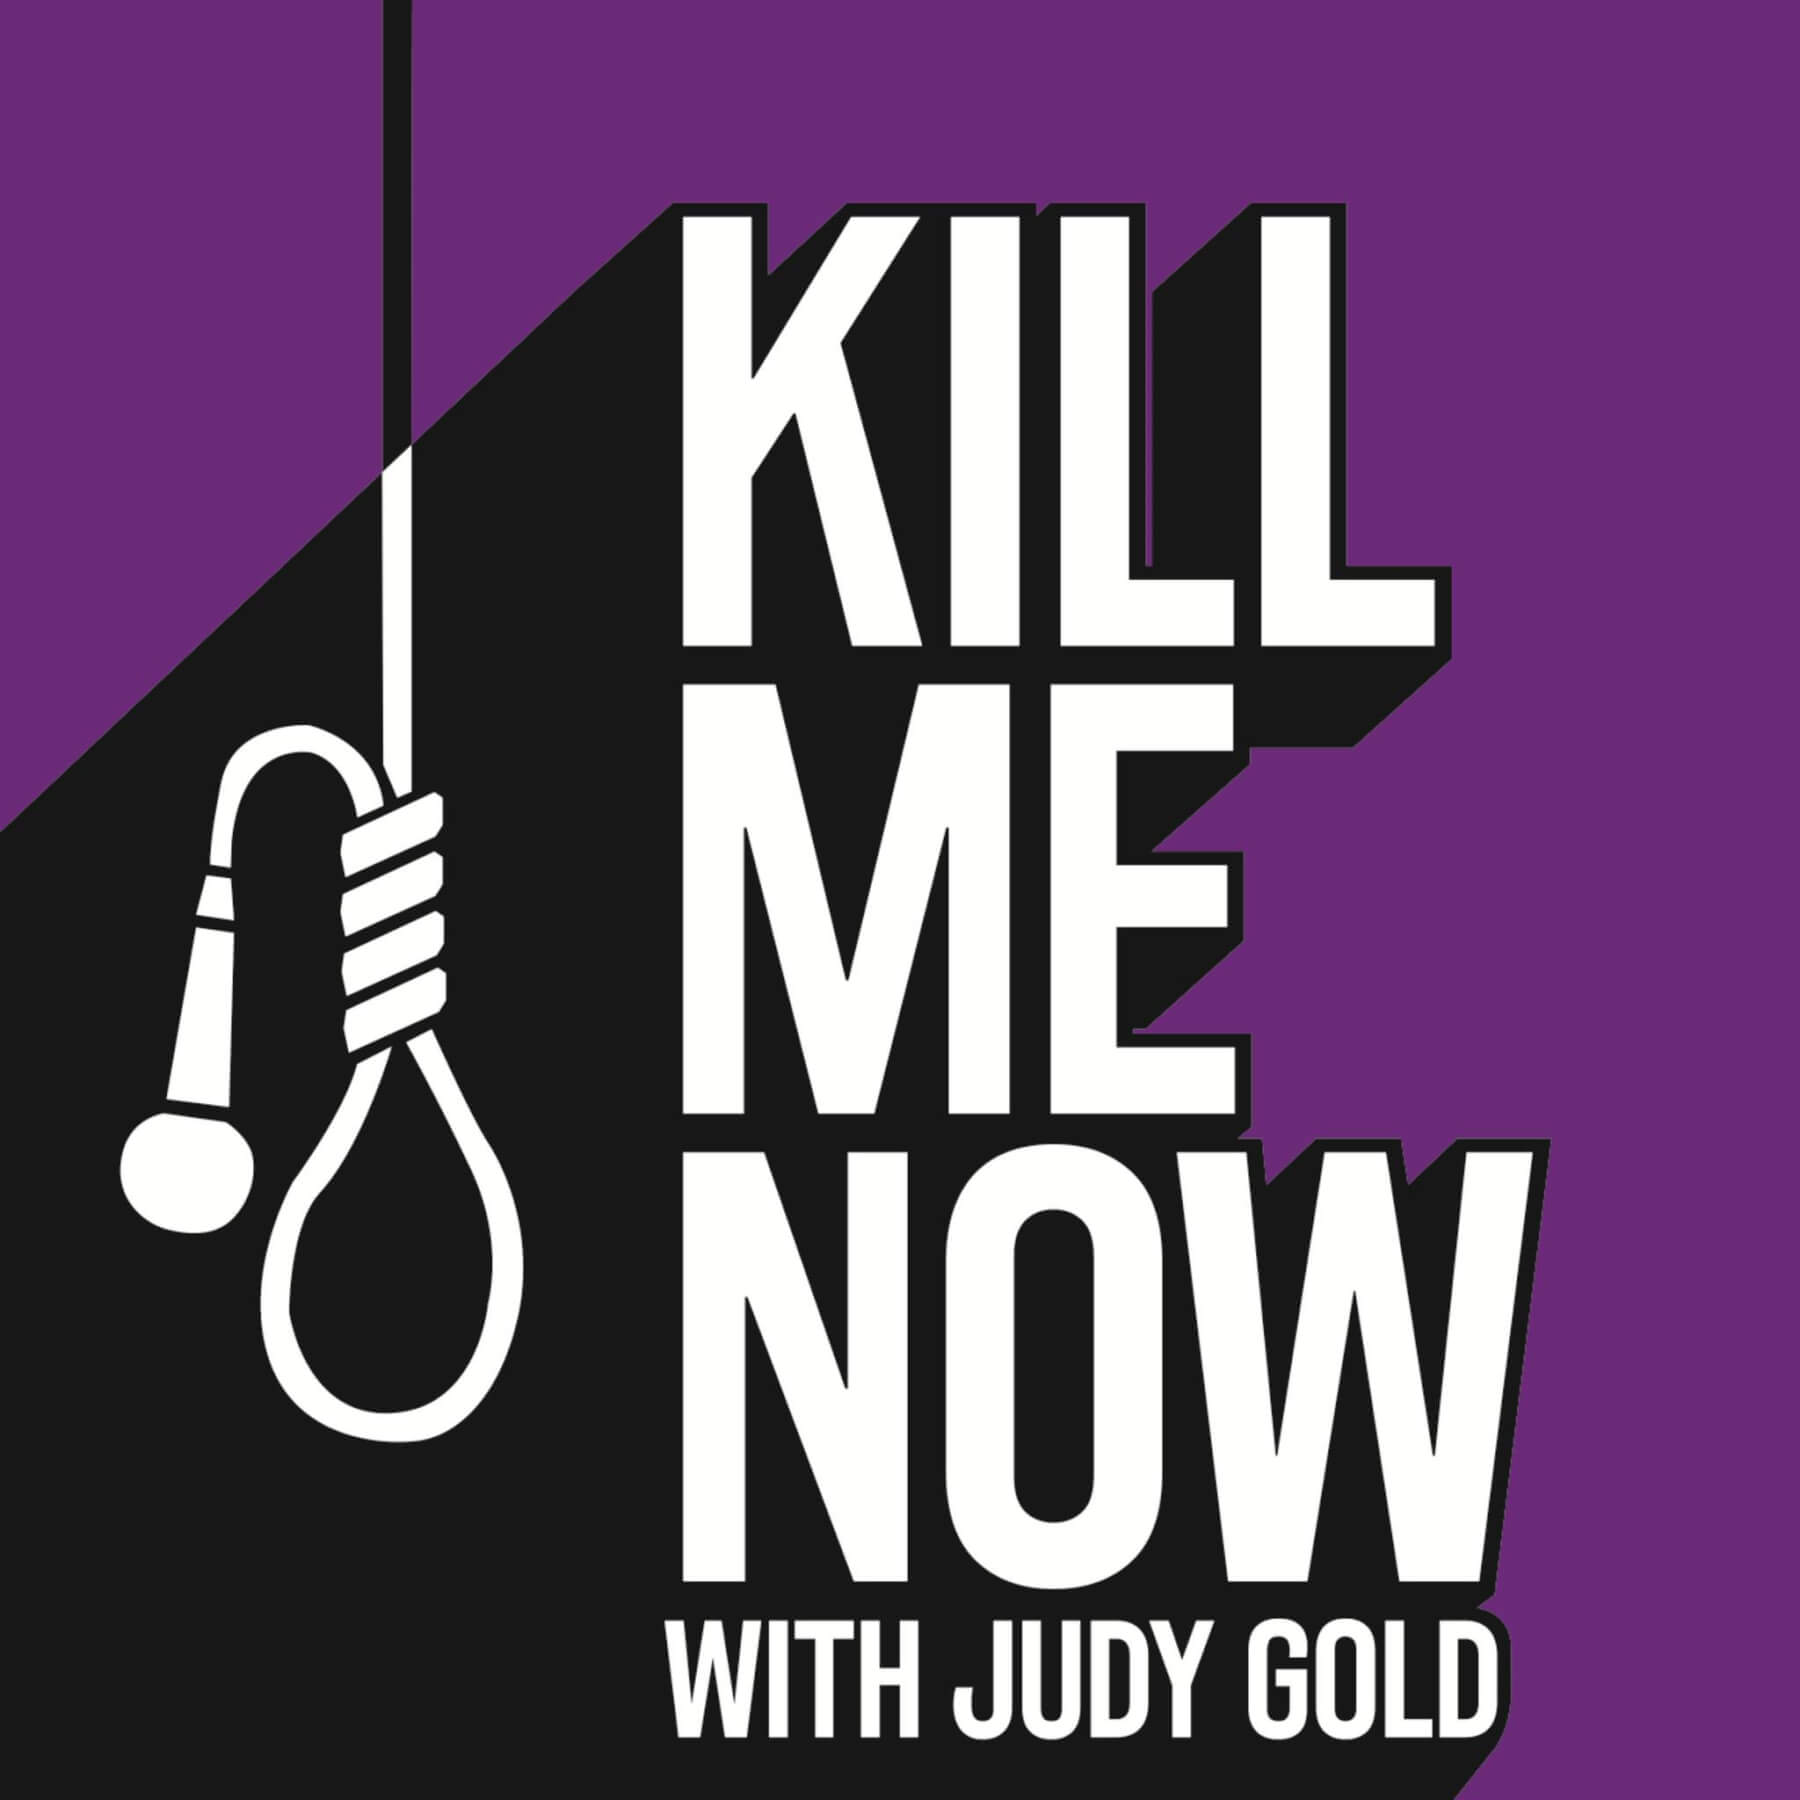 Pissed-Off and Proud of It! Comedian Judy Gold Thinks We All Need to Vent a Little